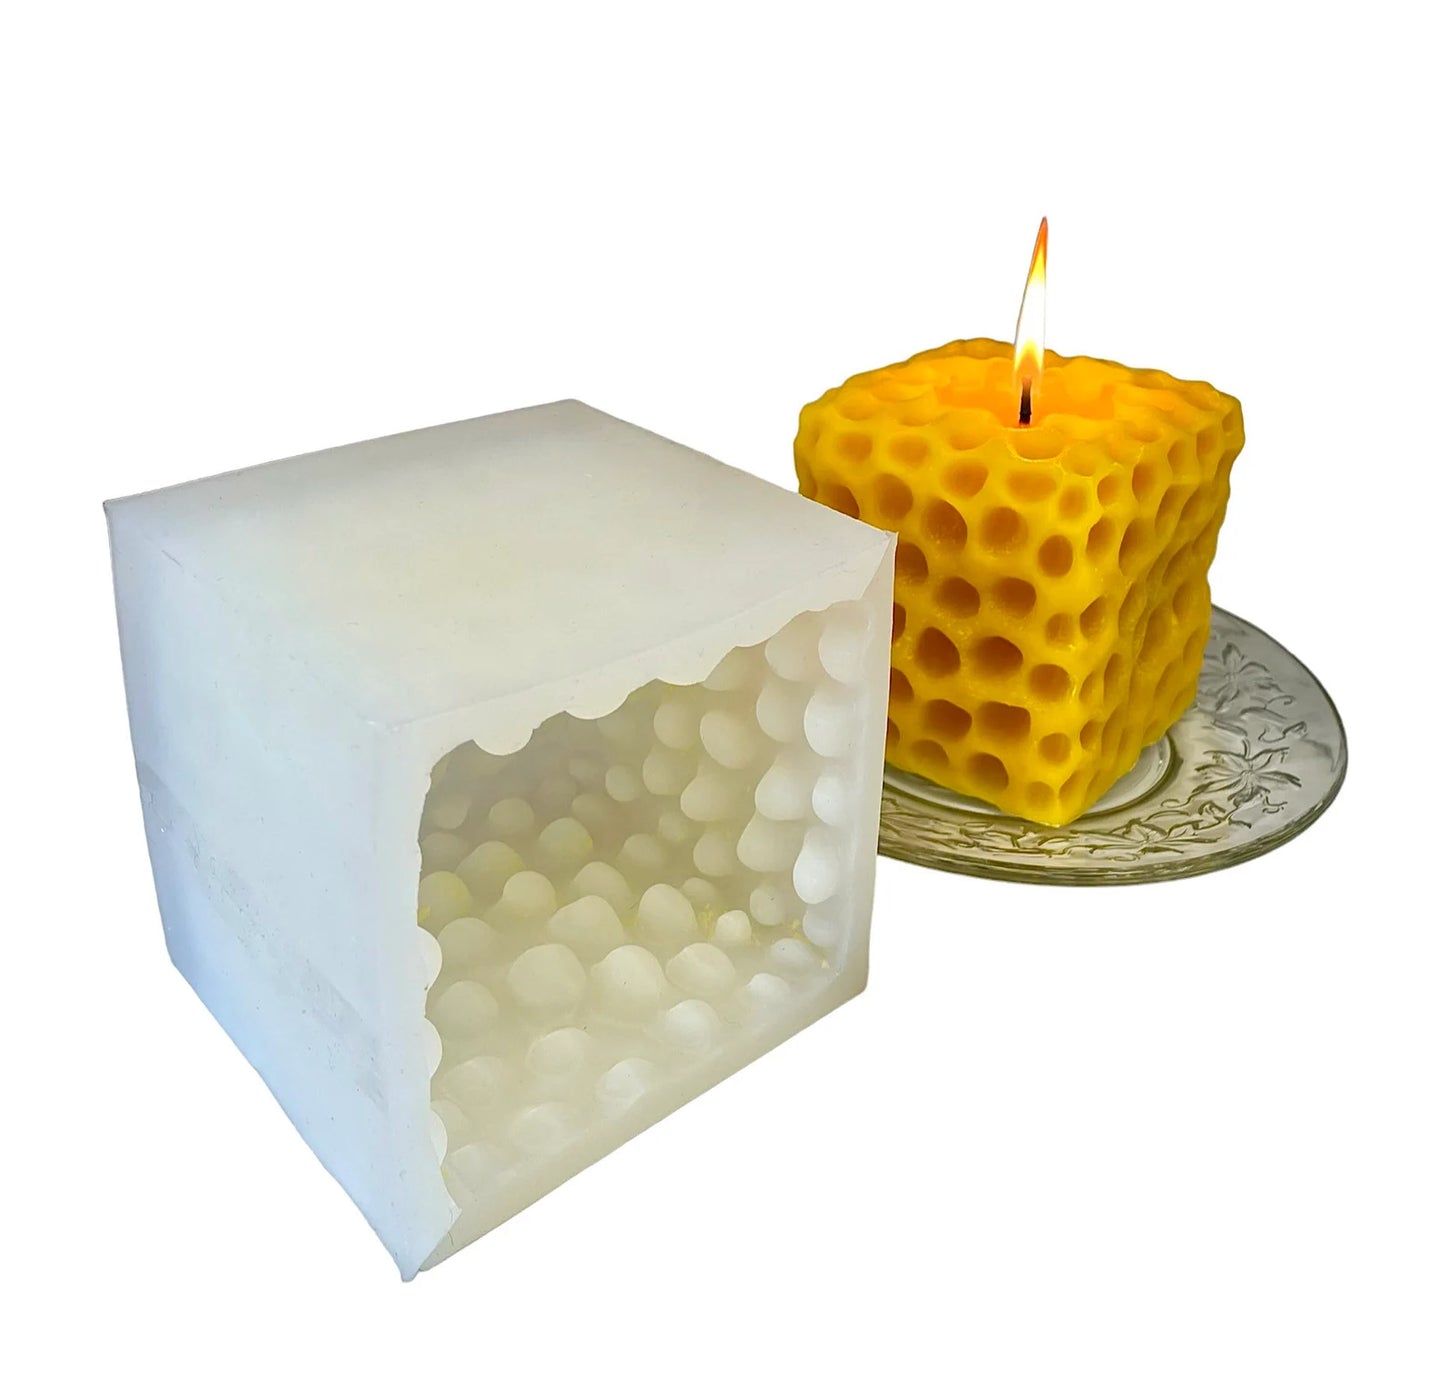 SILICONE HONEYCOMB MOLD